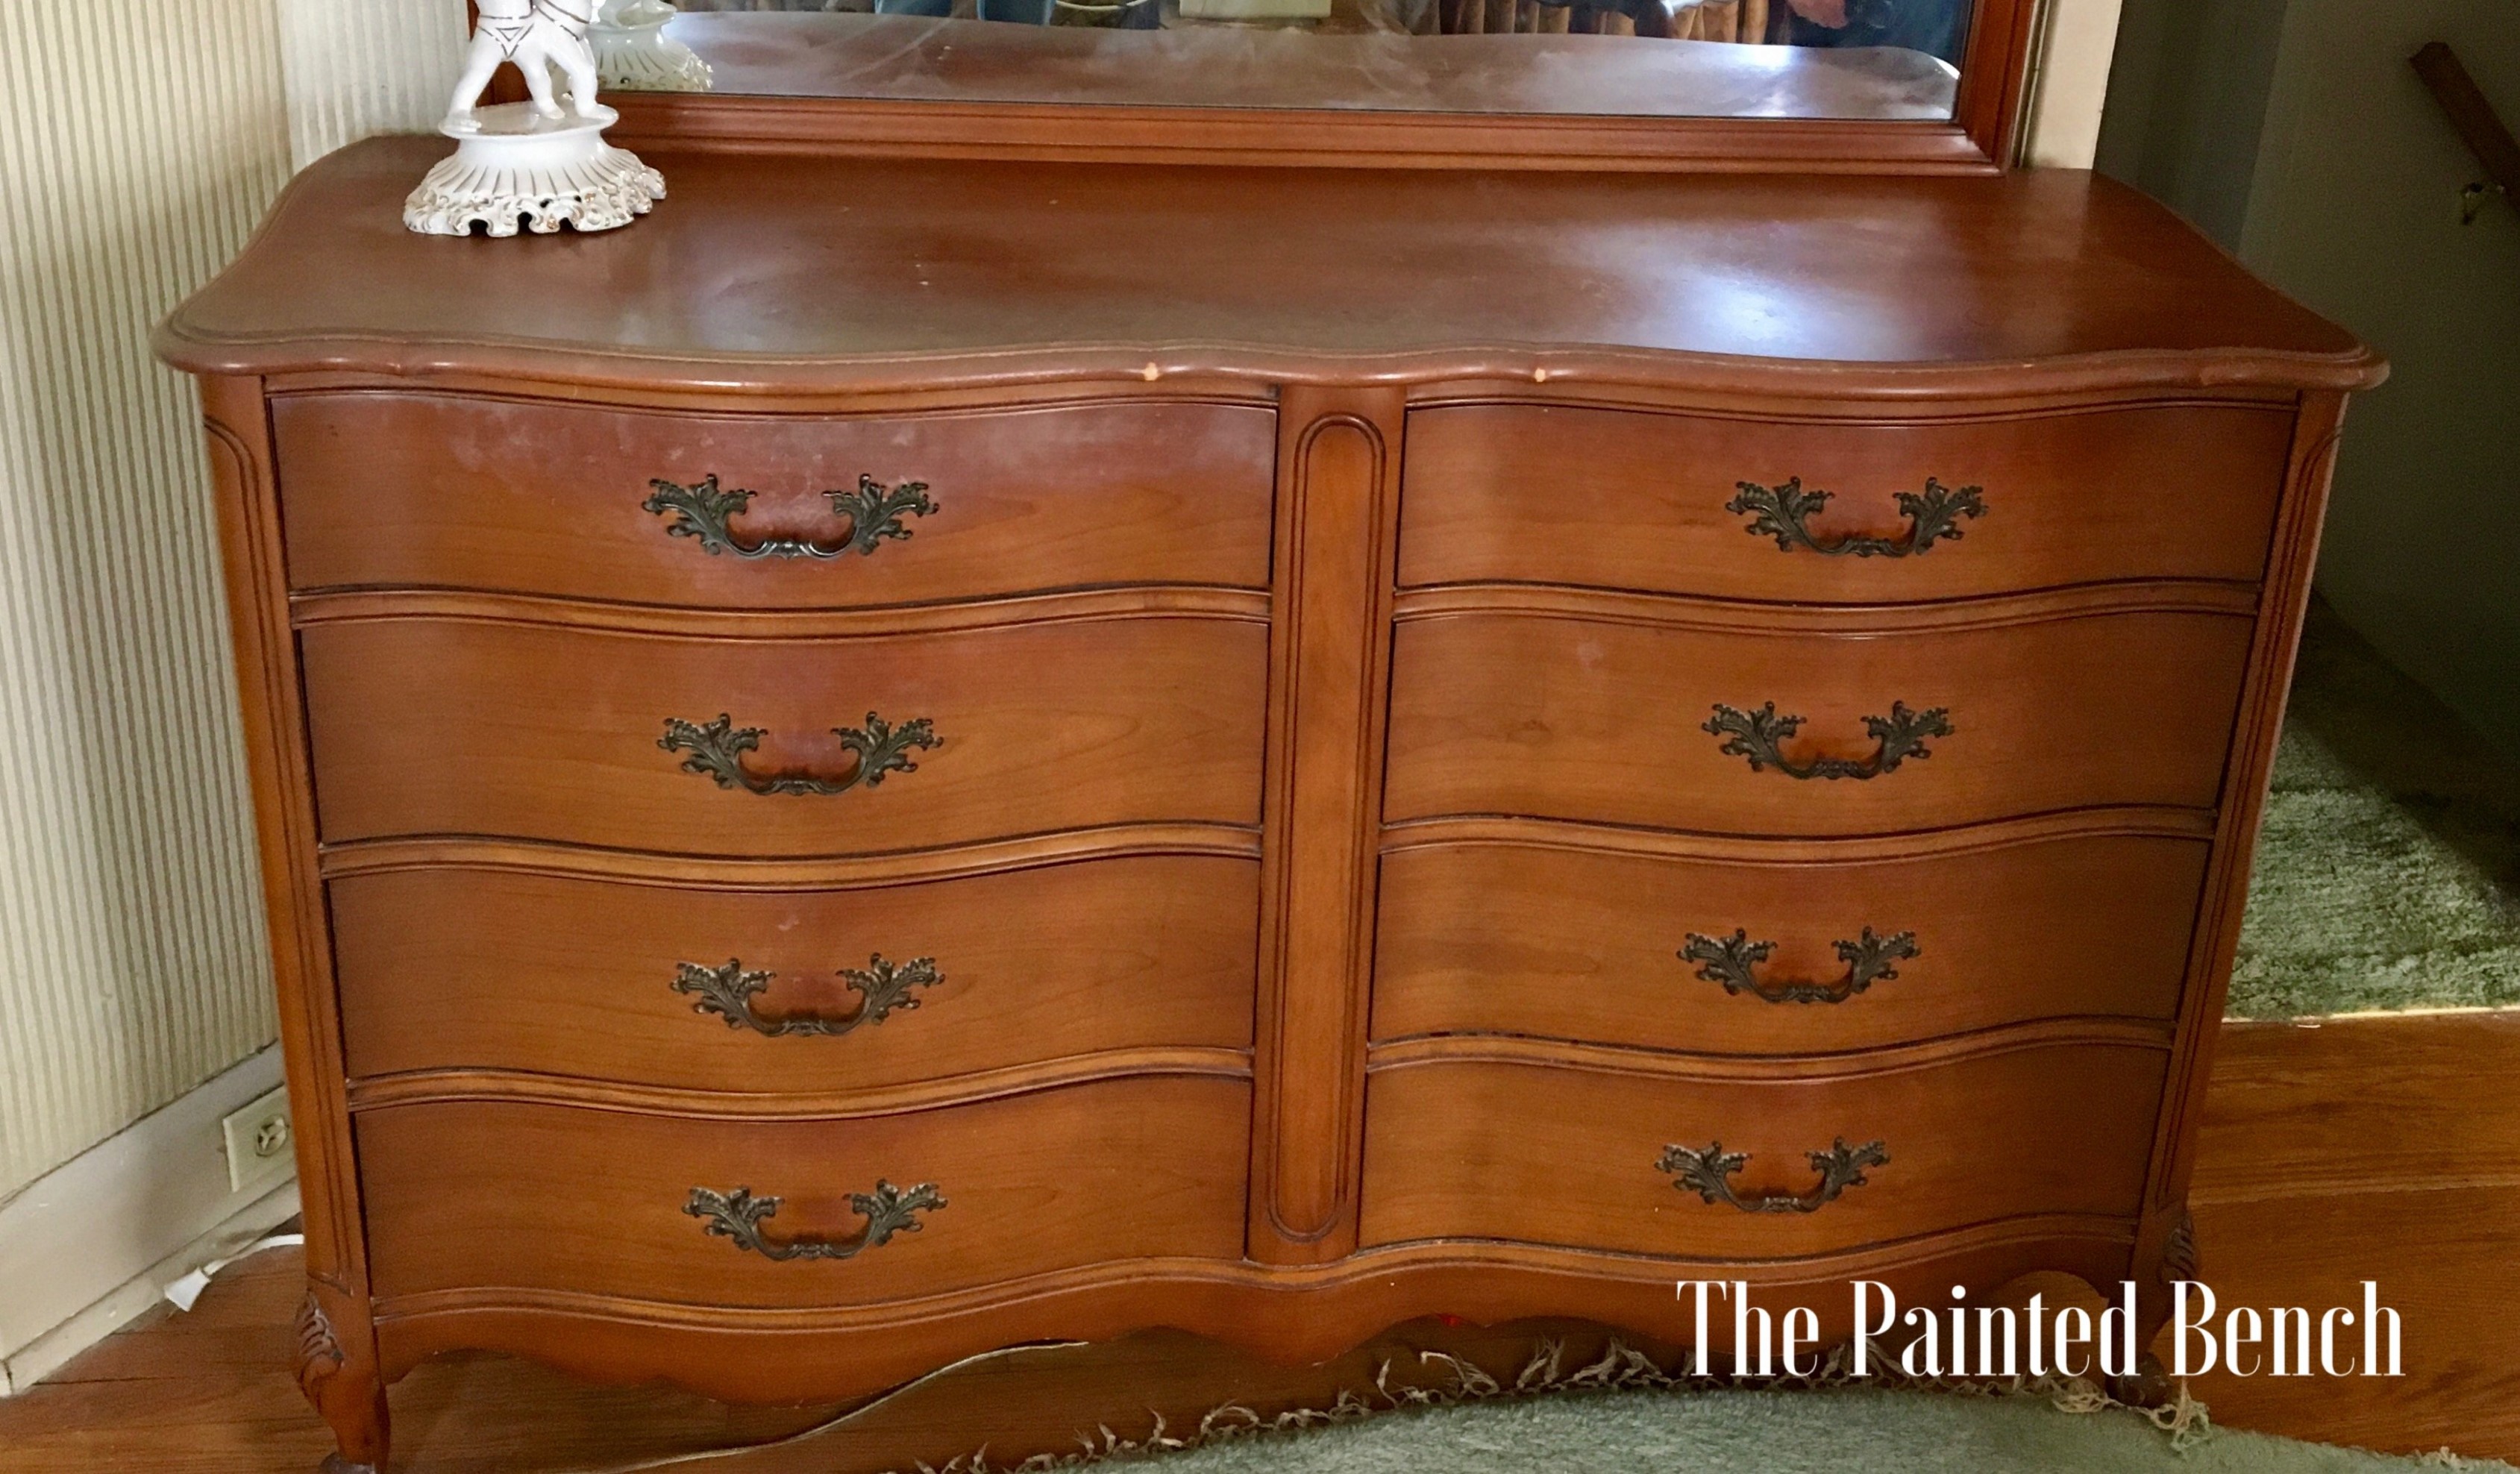 How To Repurpose A Dresser With Annie Sloan Paint The Painted Bench Where To Buy Annie Sloan Chalk Paint Ontario